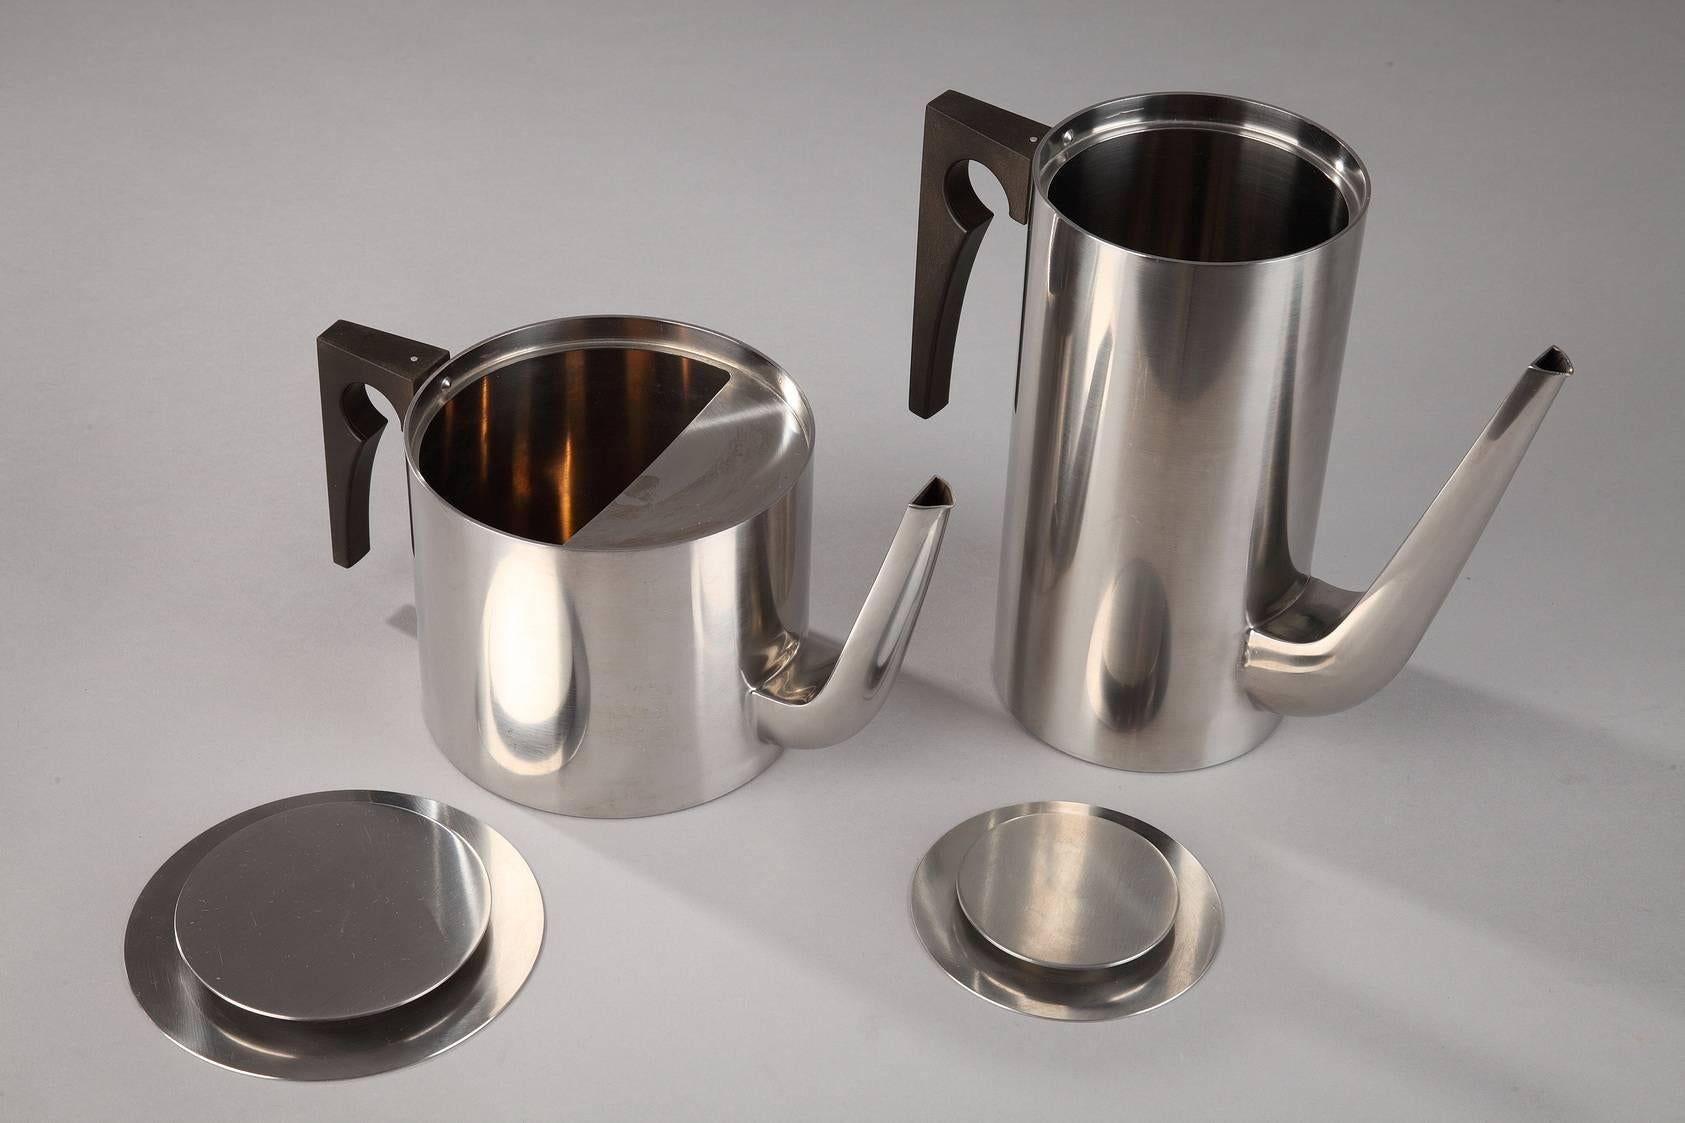 Arne Jacobsen Stainless Steel Coffee and Tea Service by Stelton 1